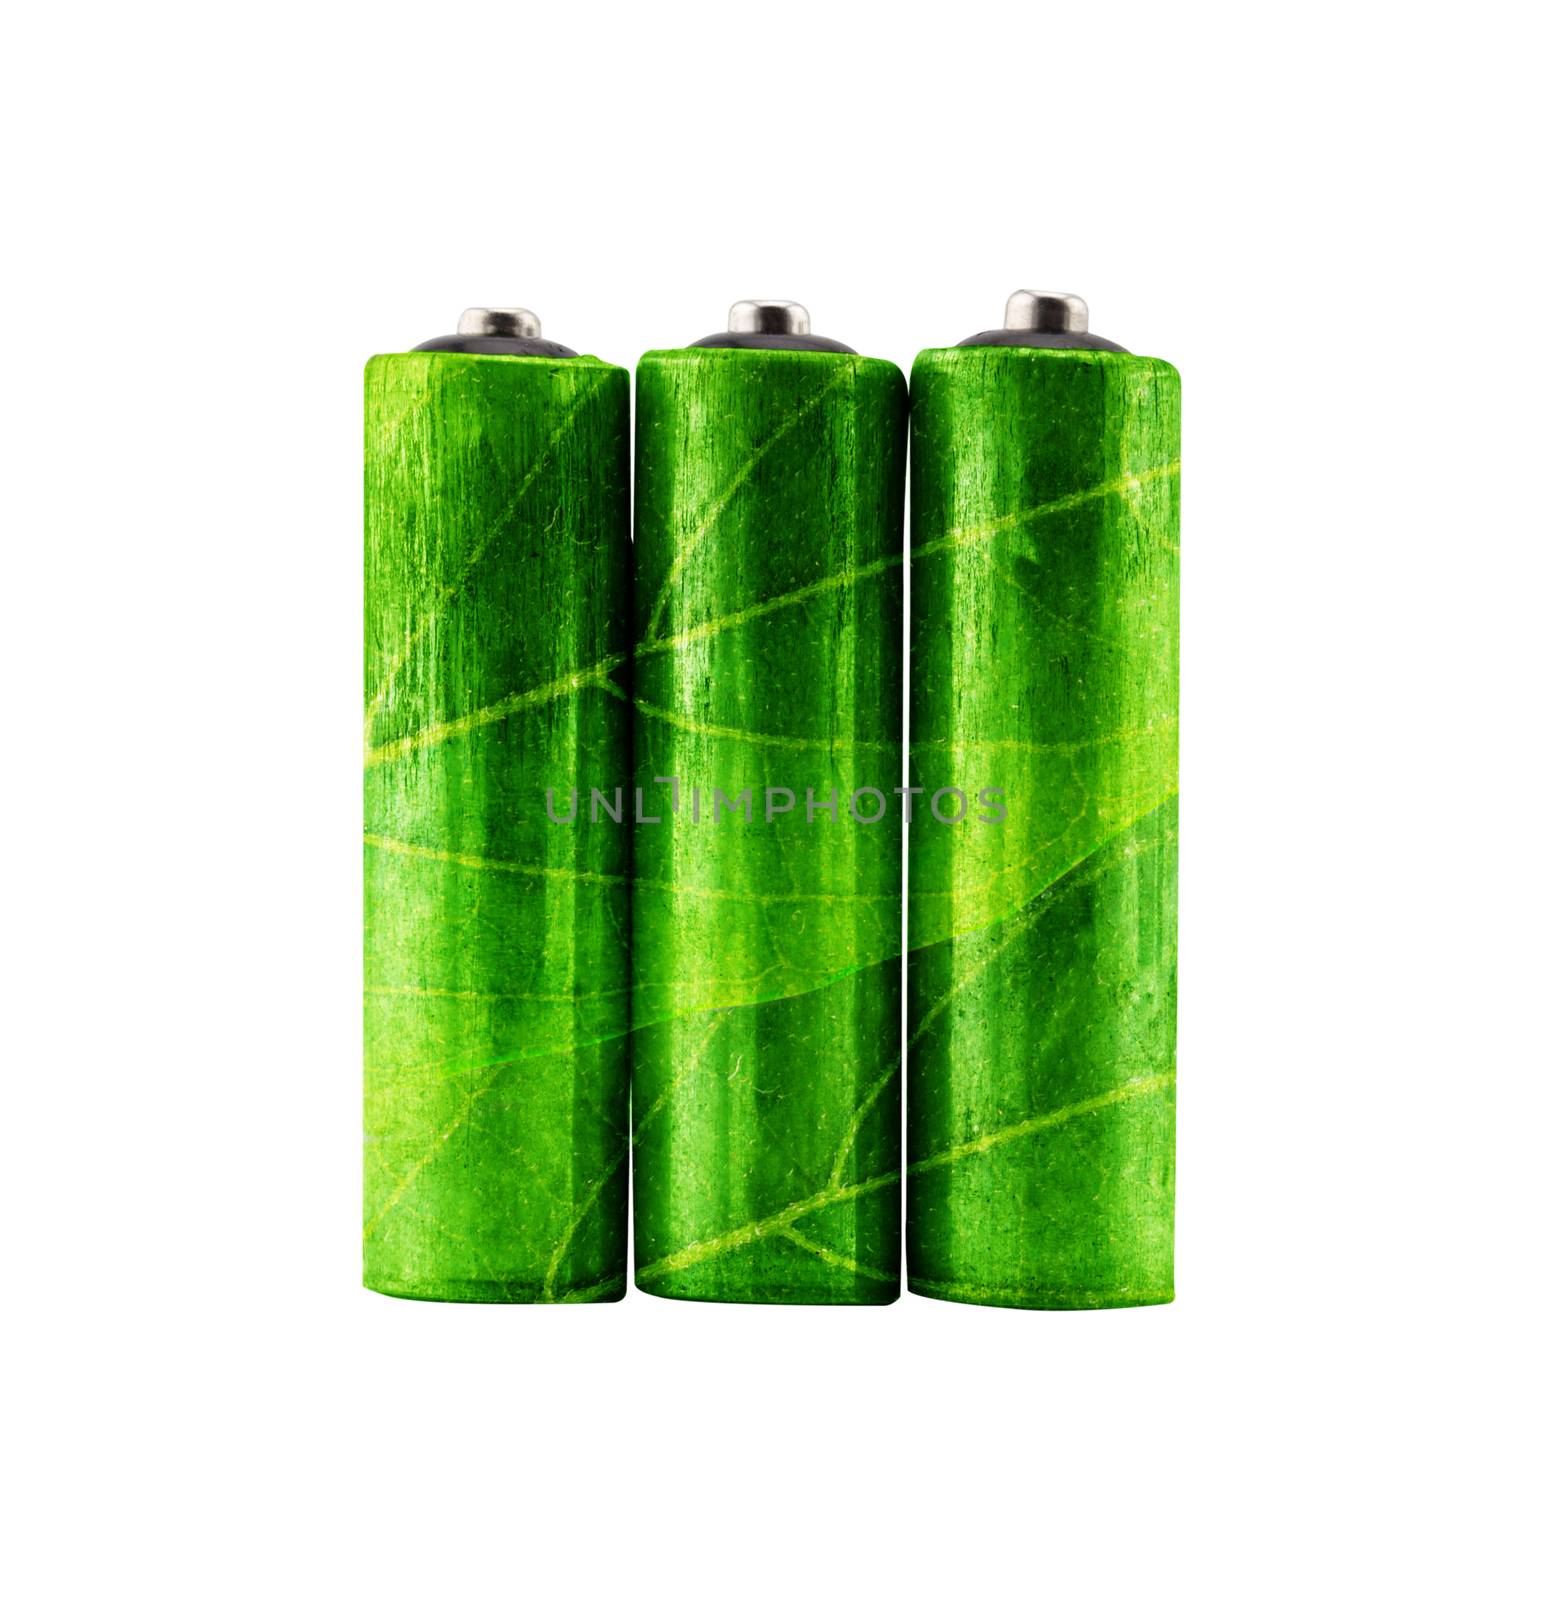 green rechargeable aa alkaline battery with leaves shape- using environment friendly product concept.